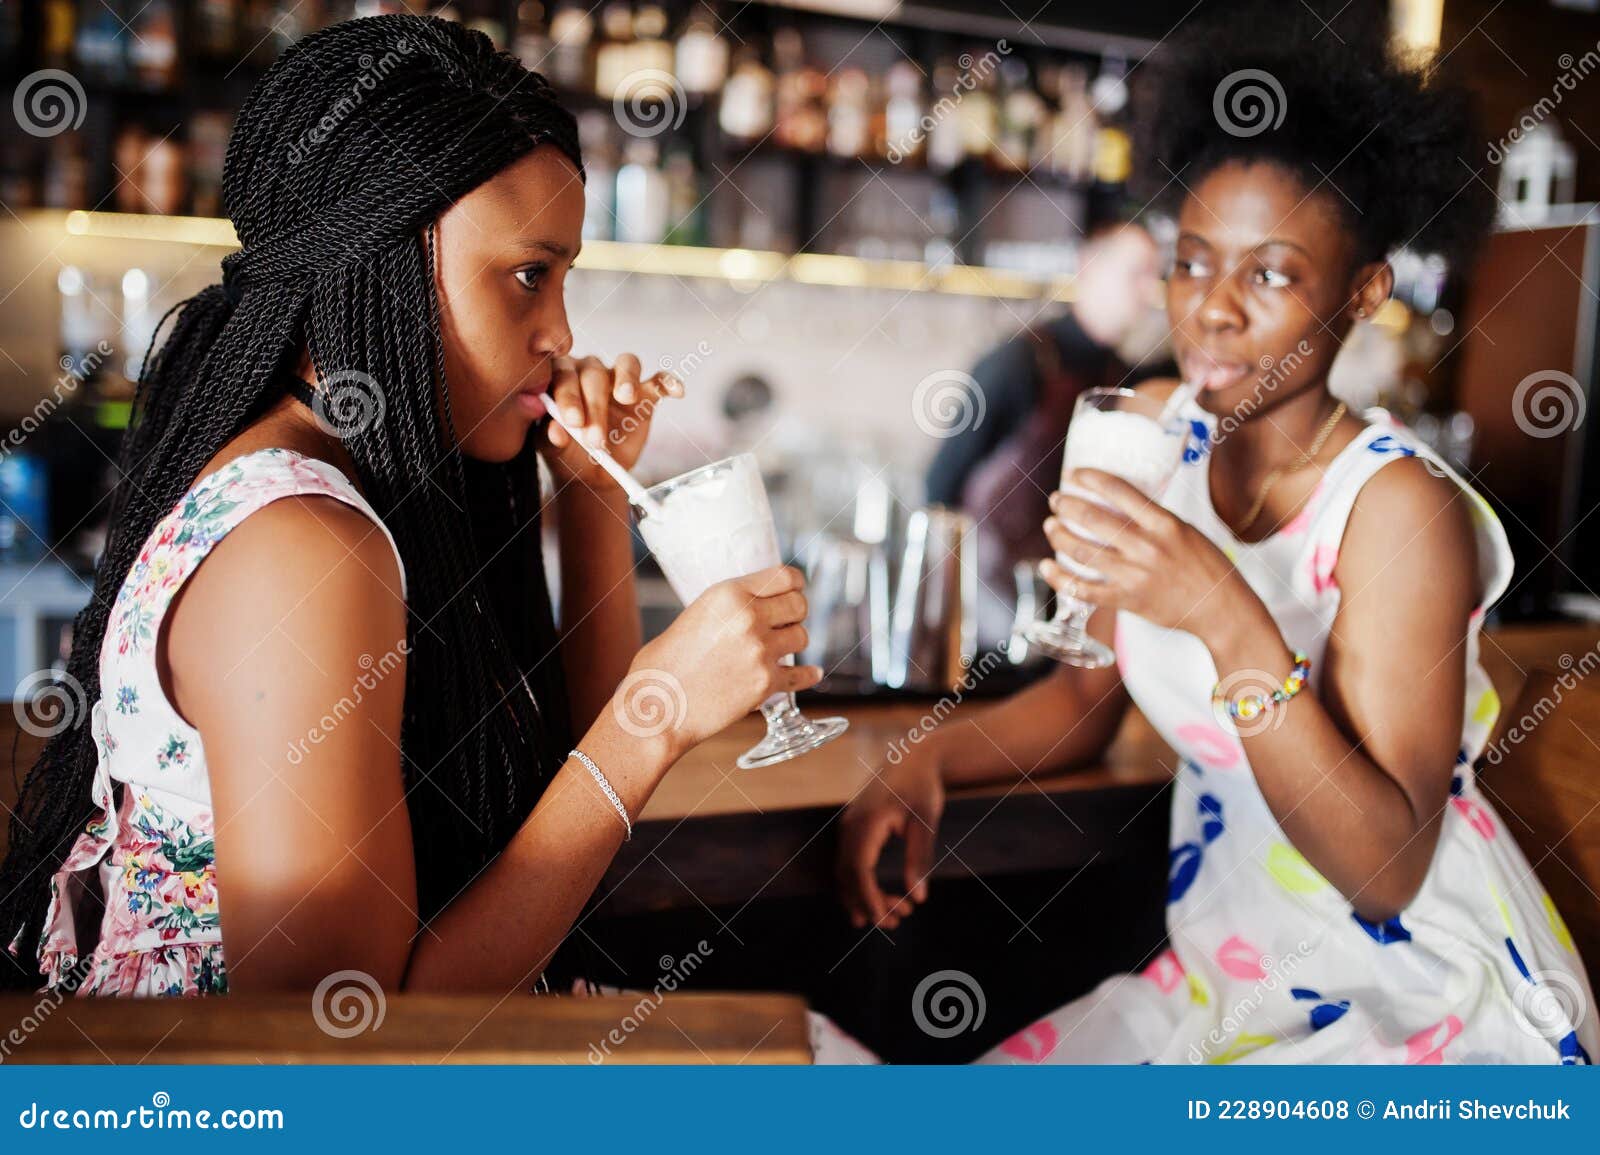 Two Black African Girlfriends at Summer Dresses Posed at Caf